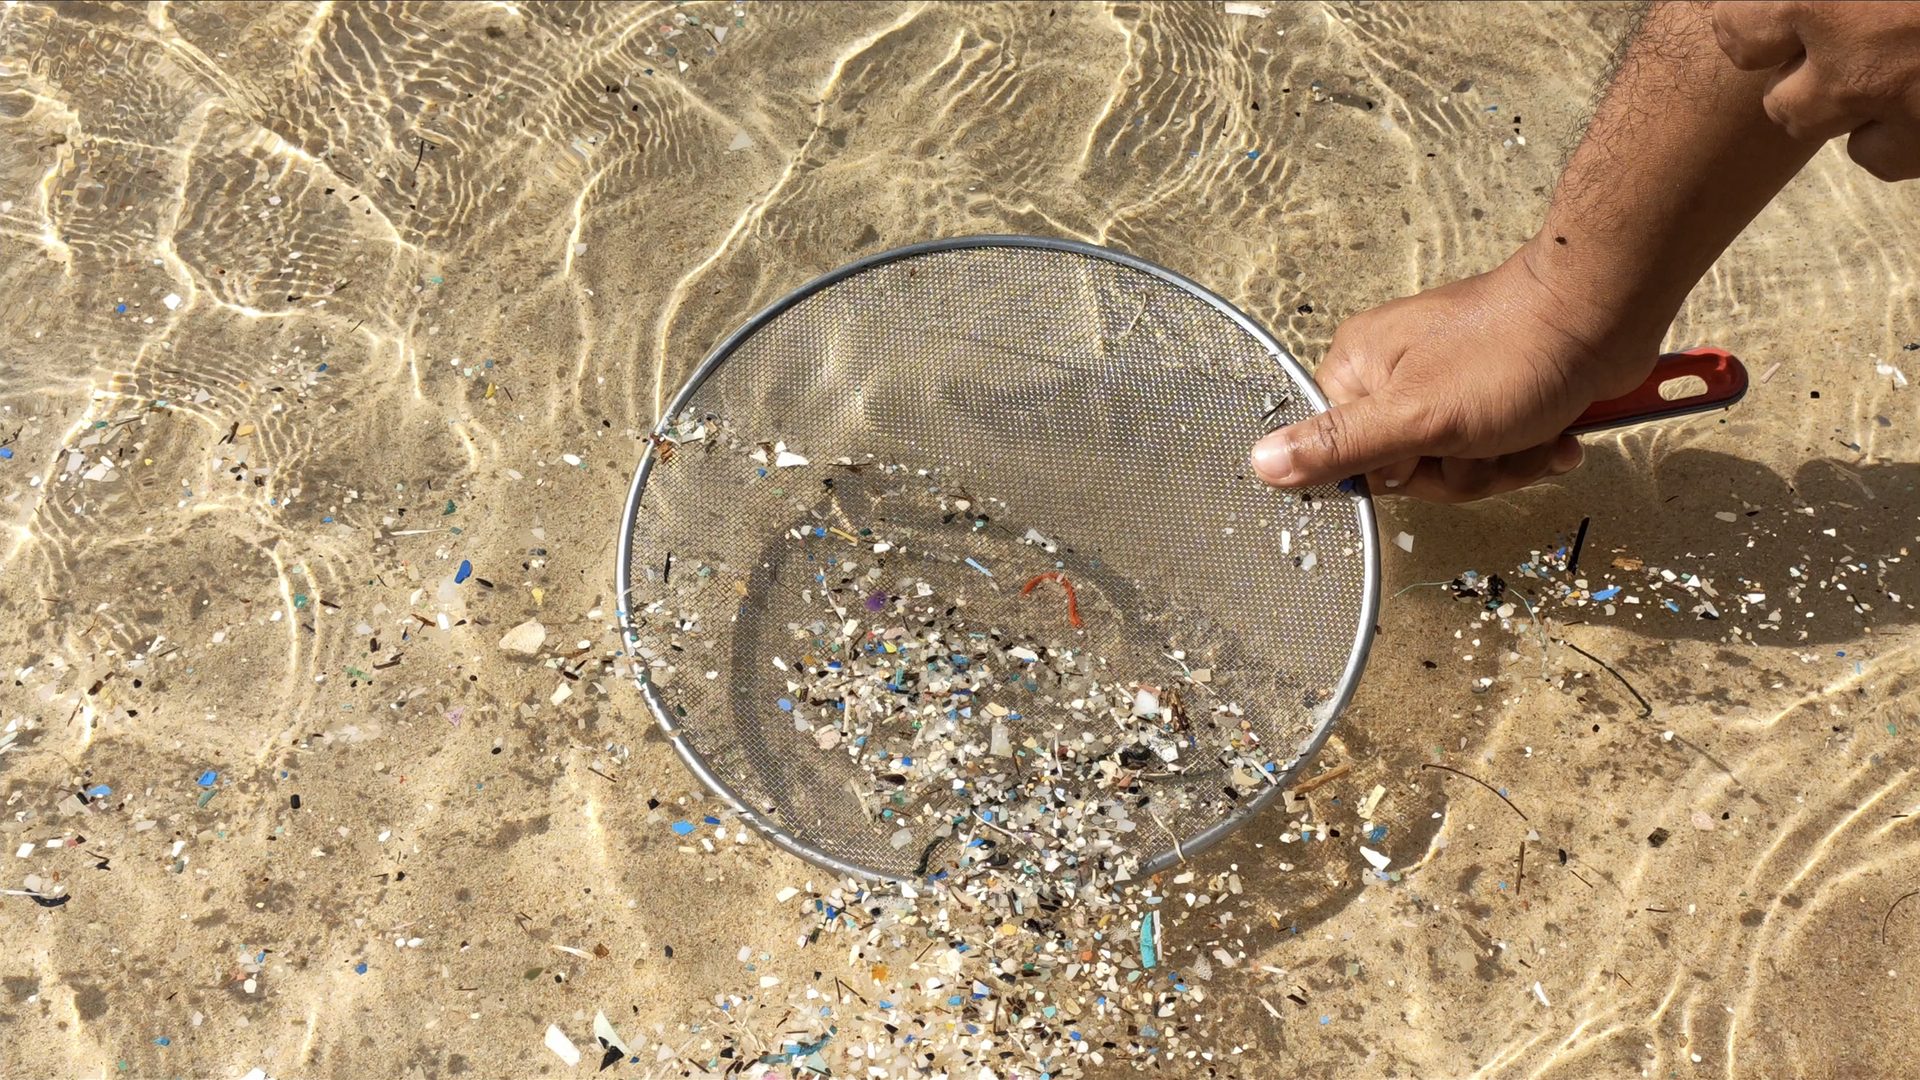 Microplastic pollution in the ocean